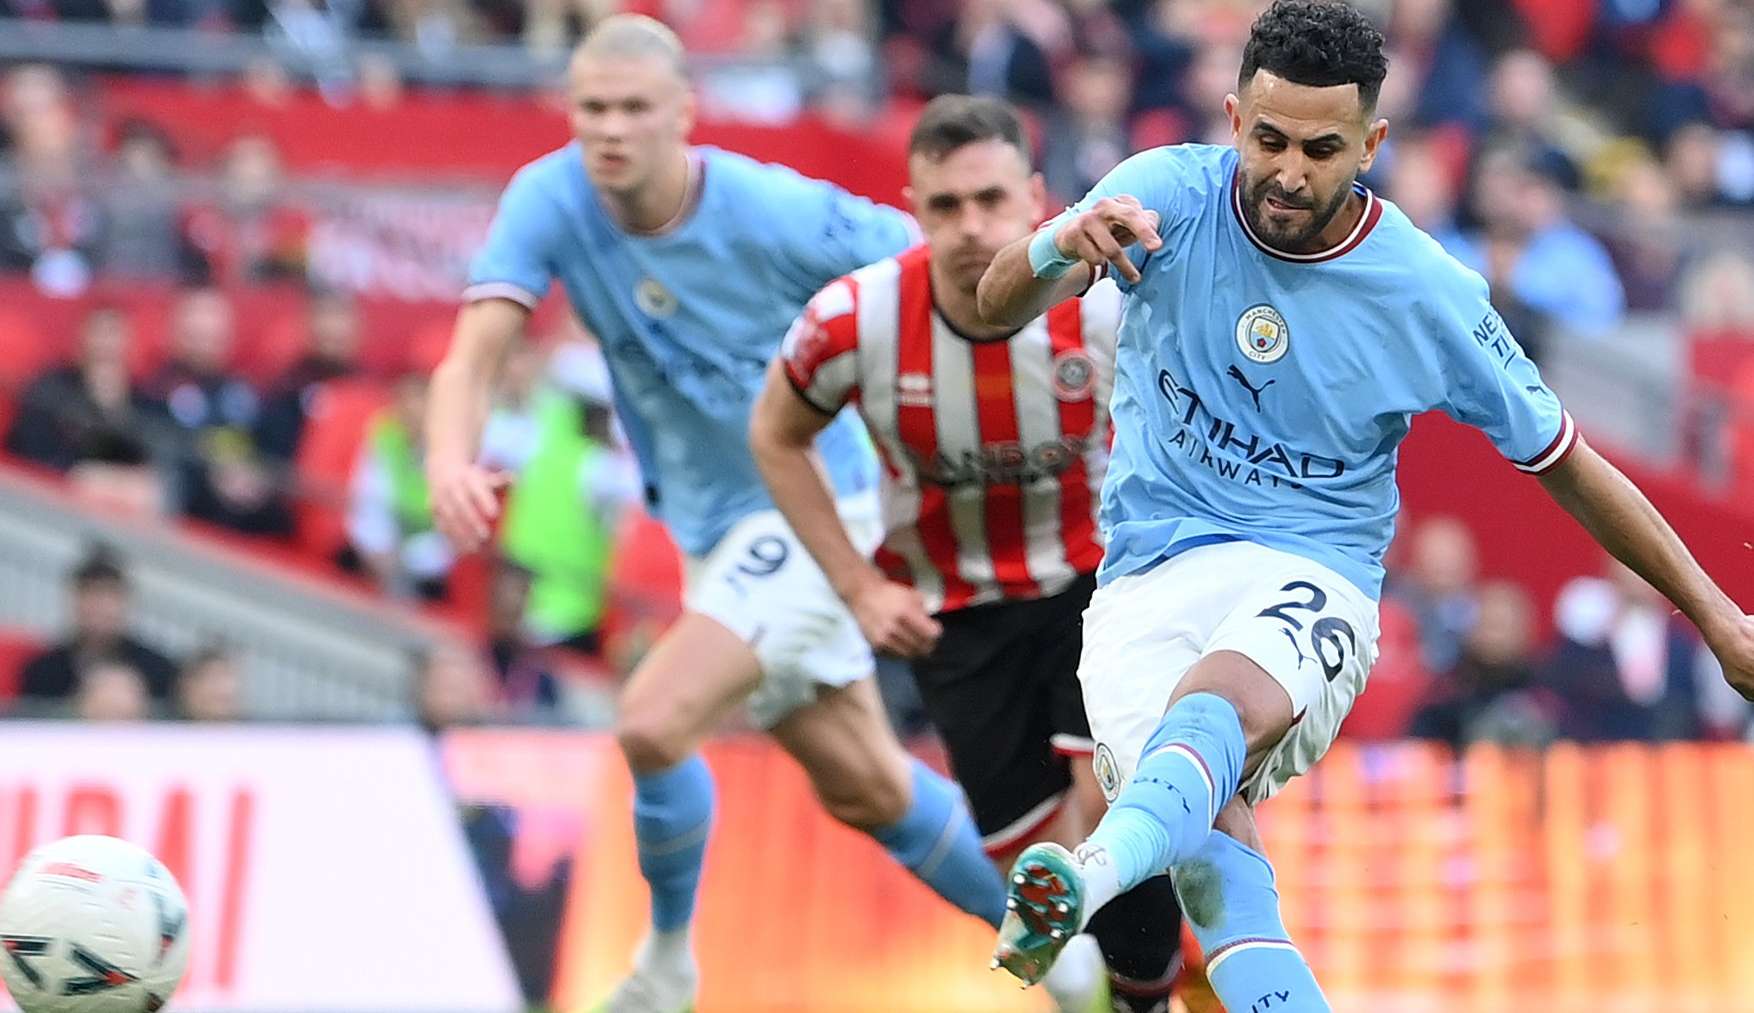 With historic performance by Mahrez Manchester City win and advance